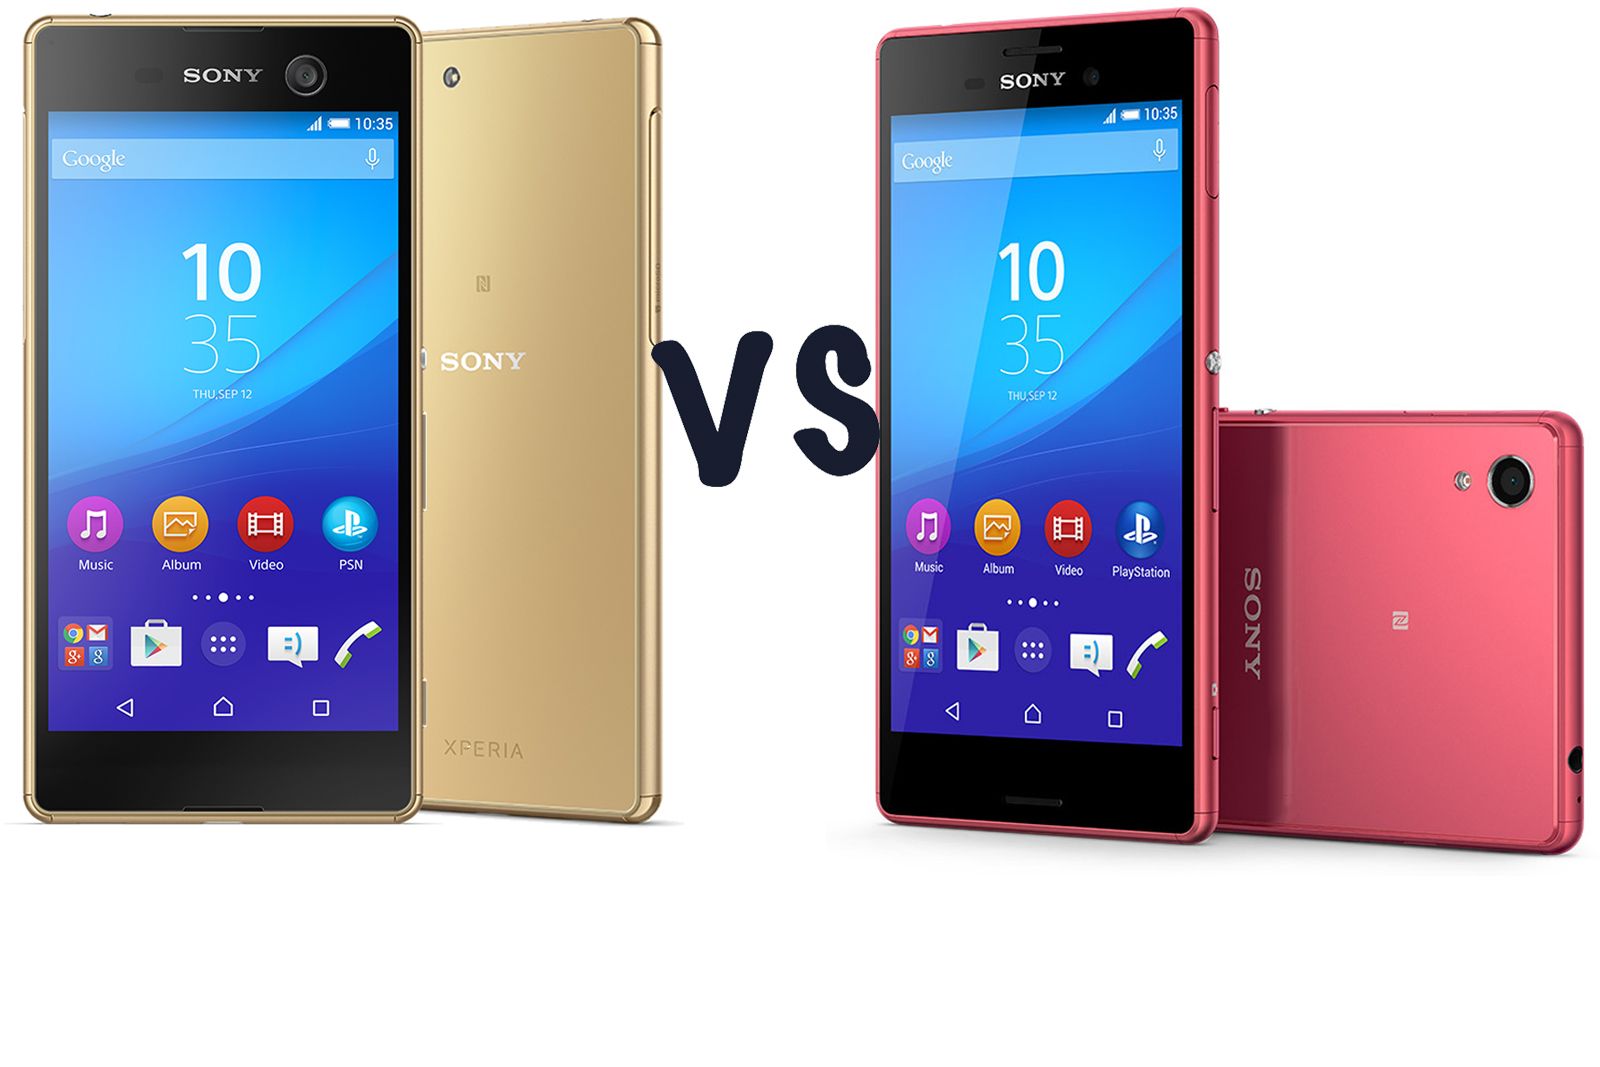 Sony Xperia M5 vs Sony Xperia M4 Aqua: What's the difference?